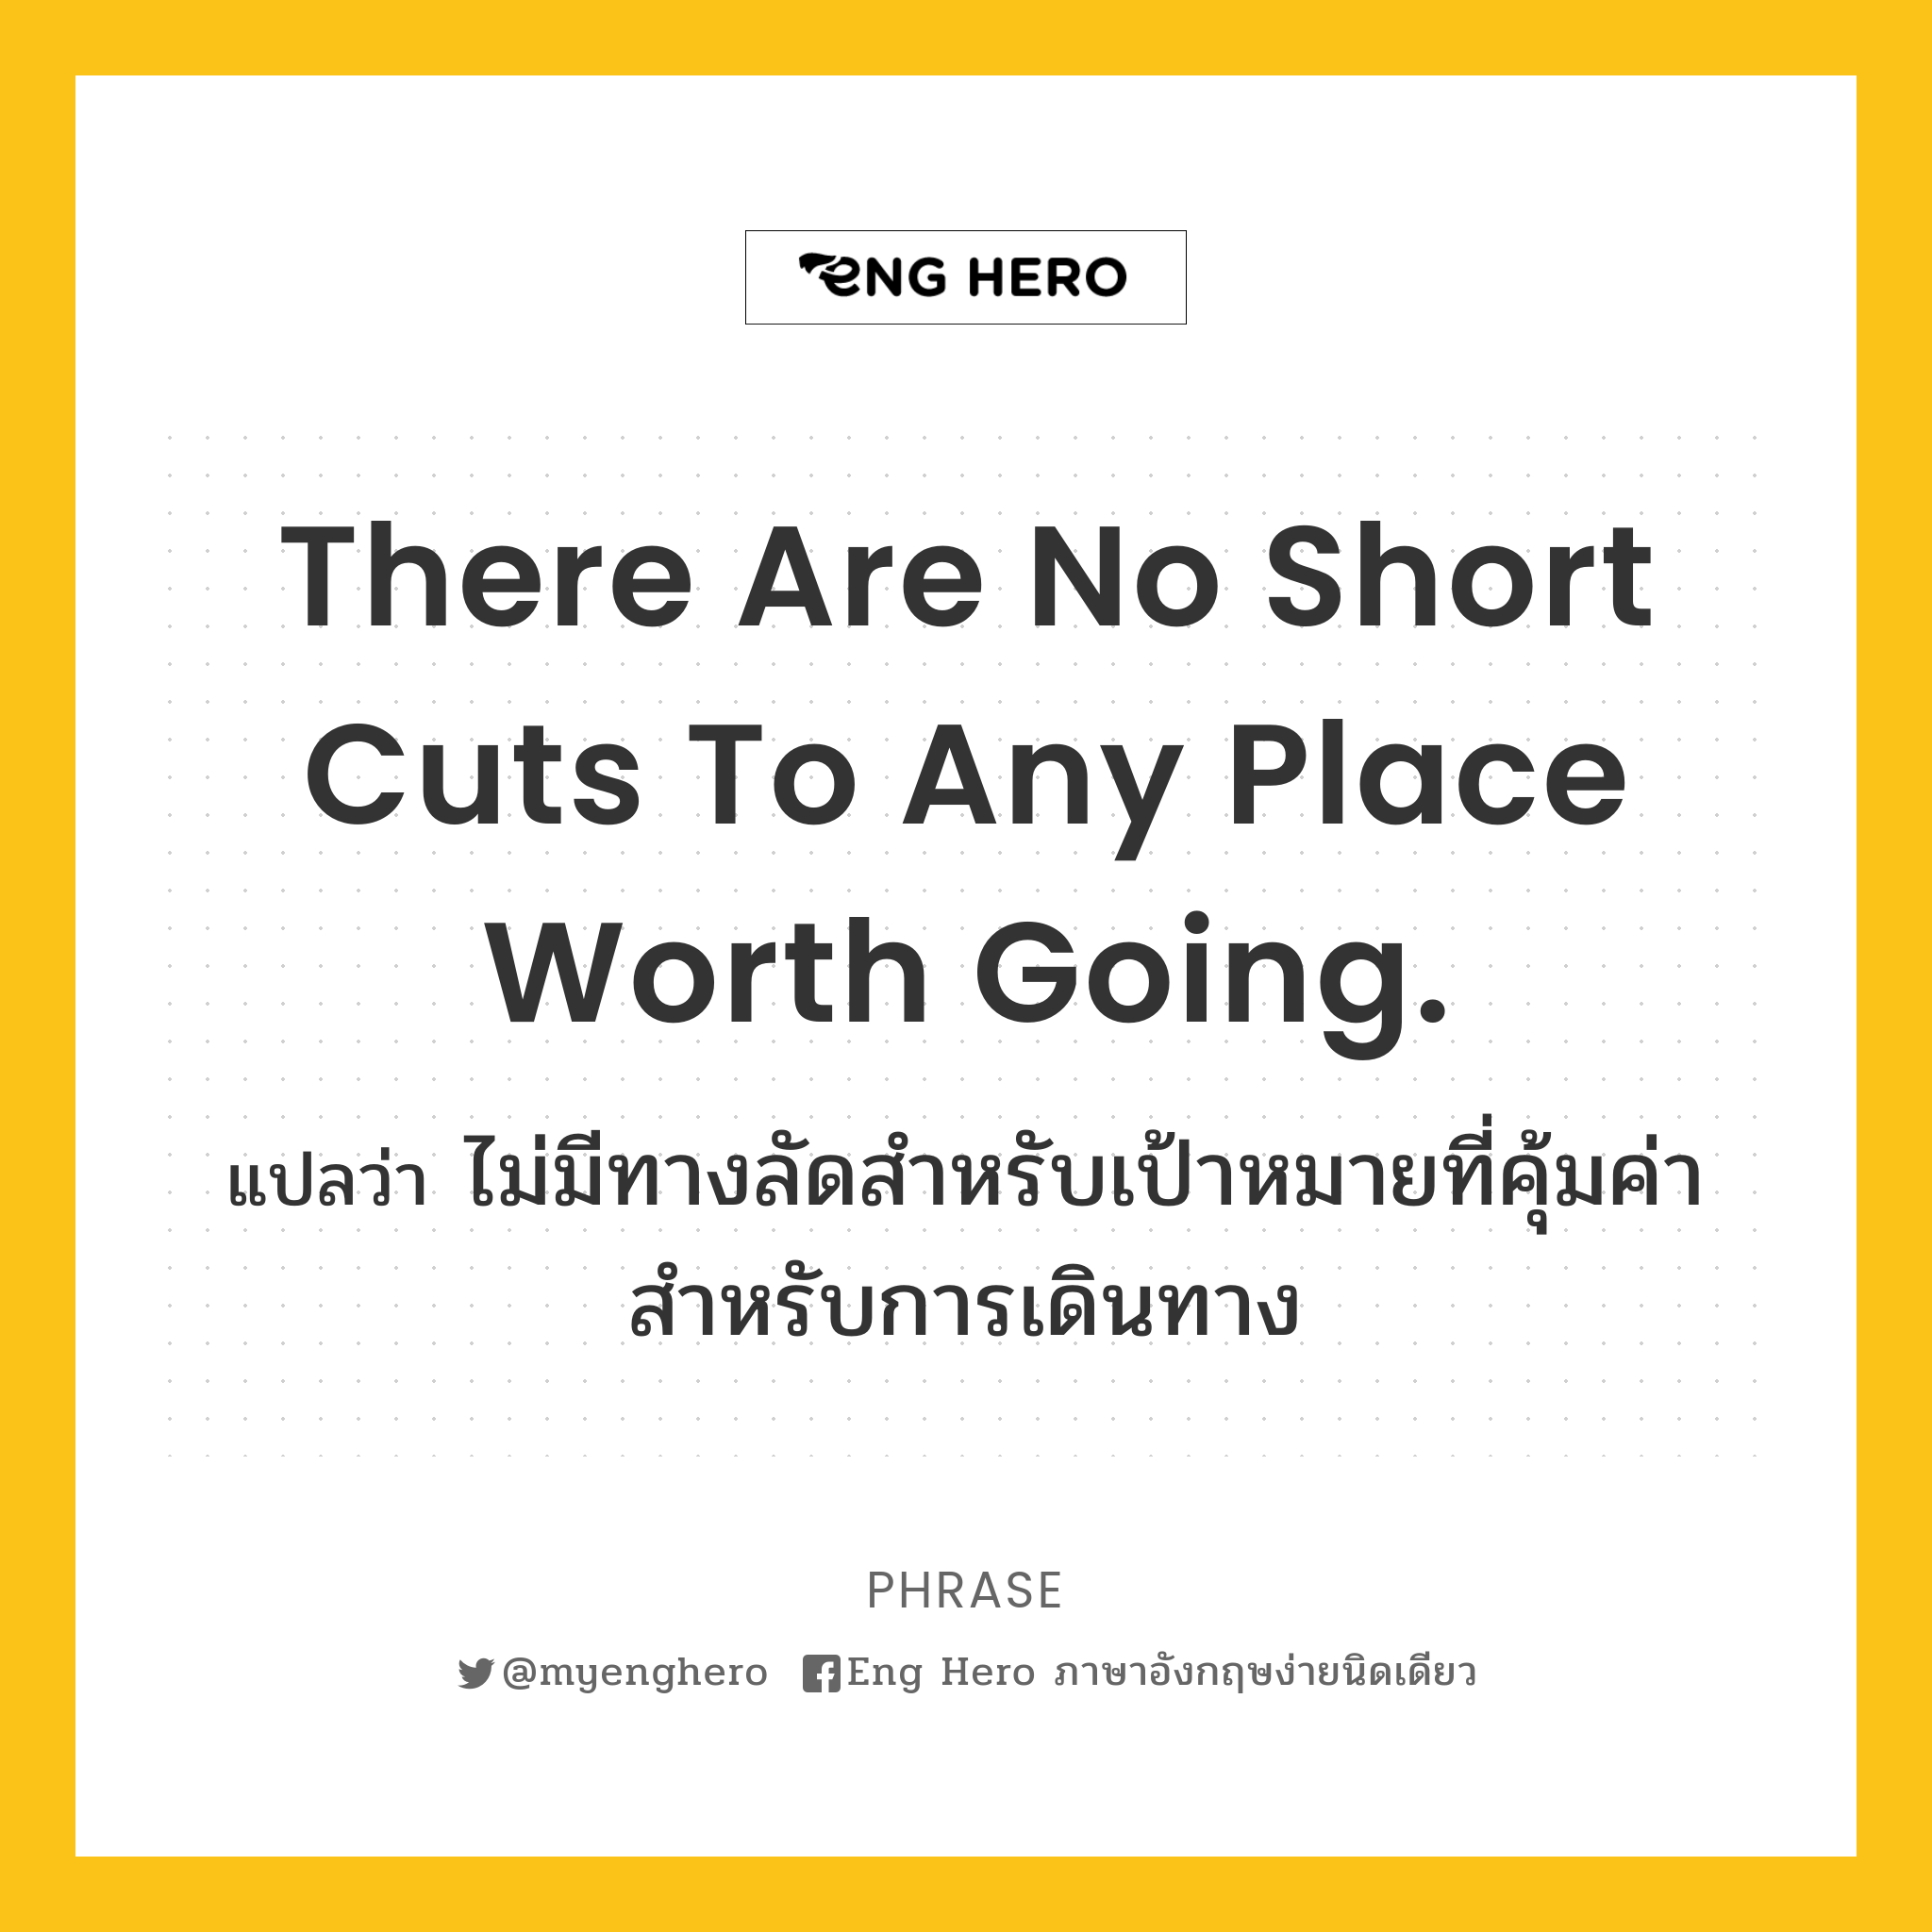 There are no short cuts to any place worth going.